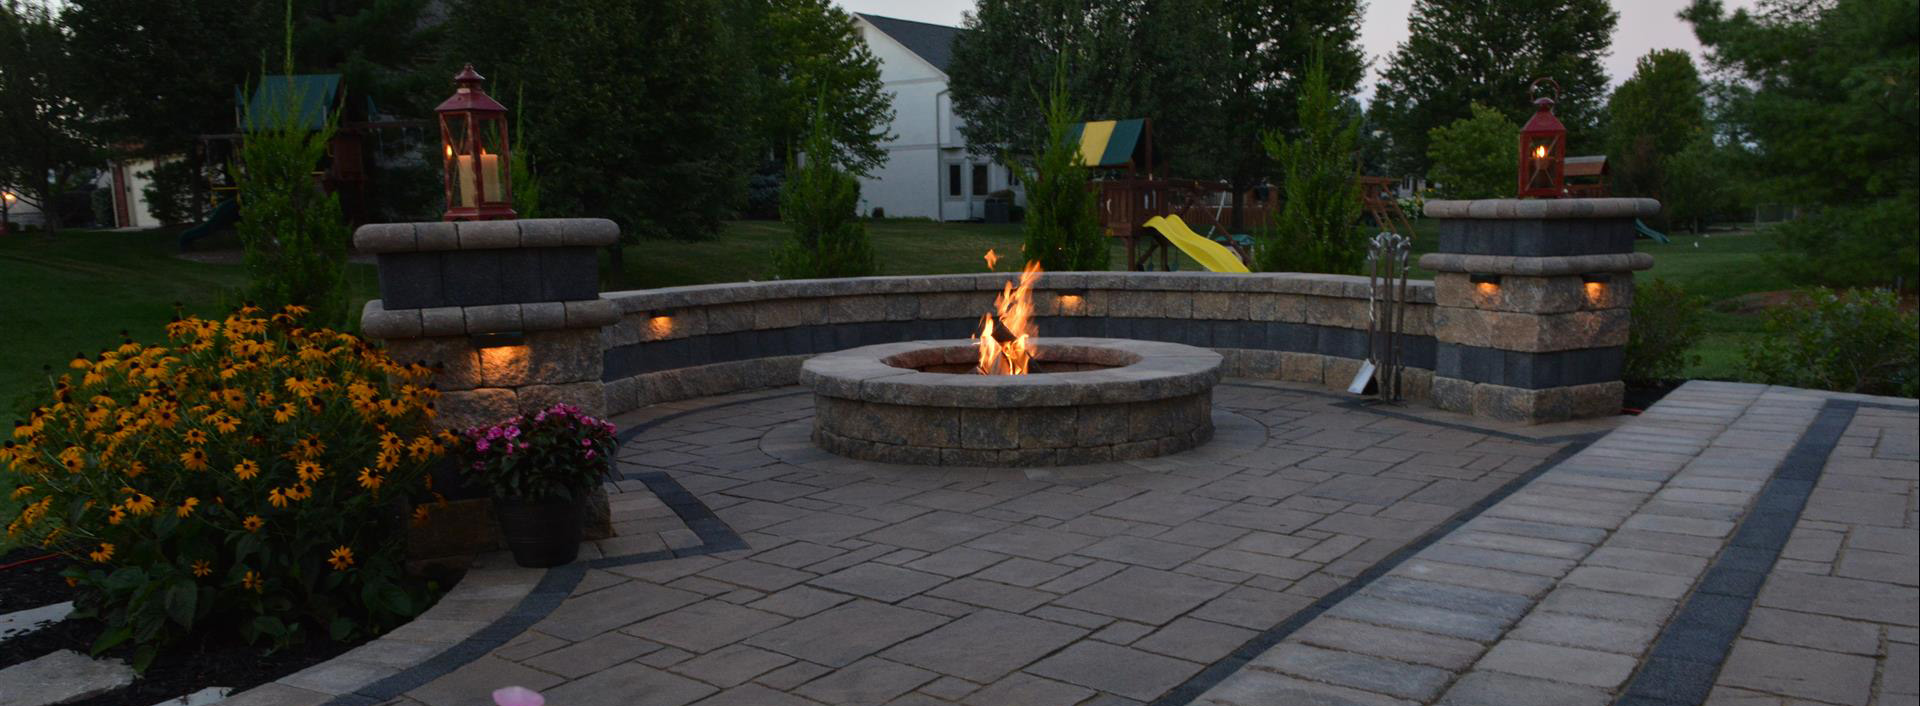 Mansfield, MA Landscaping